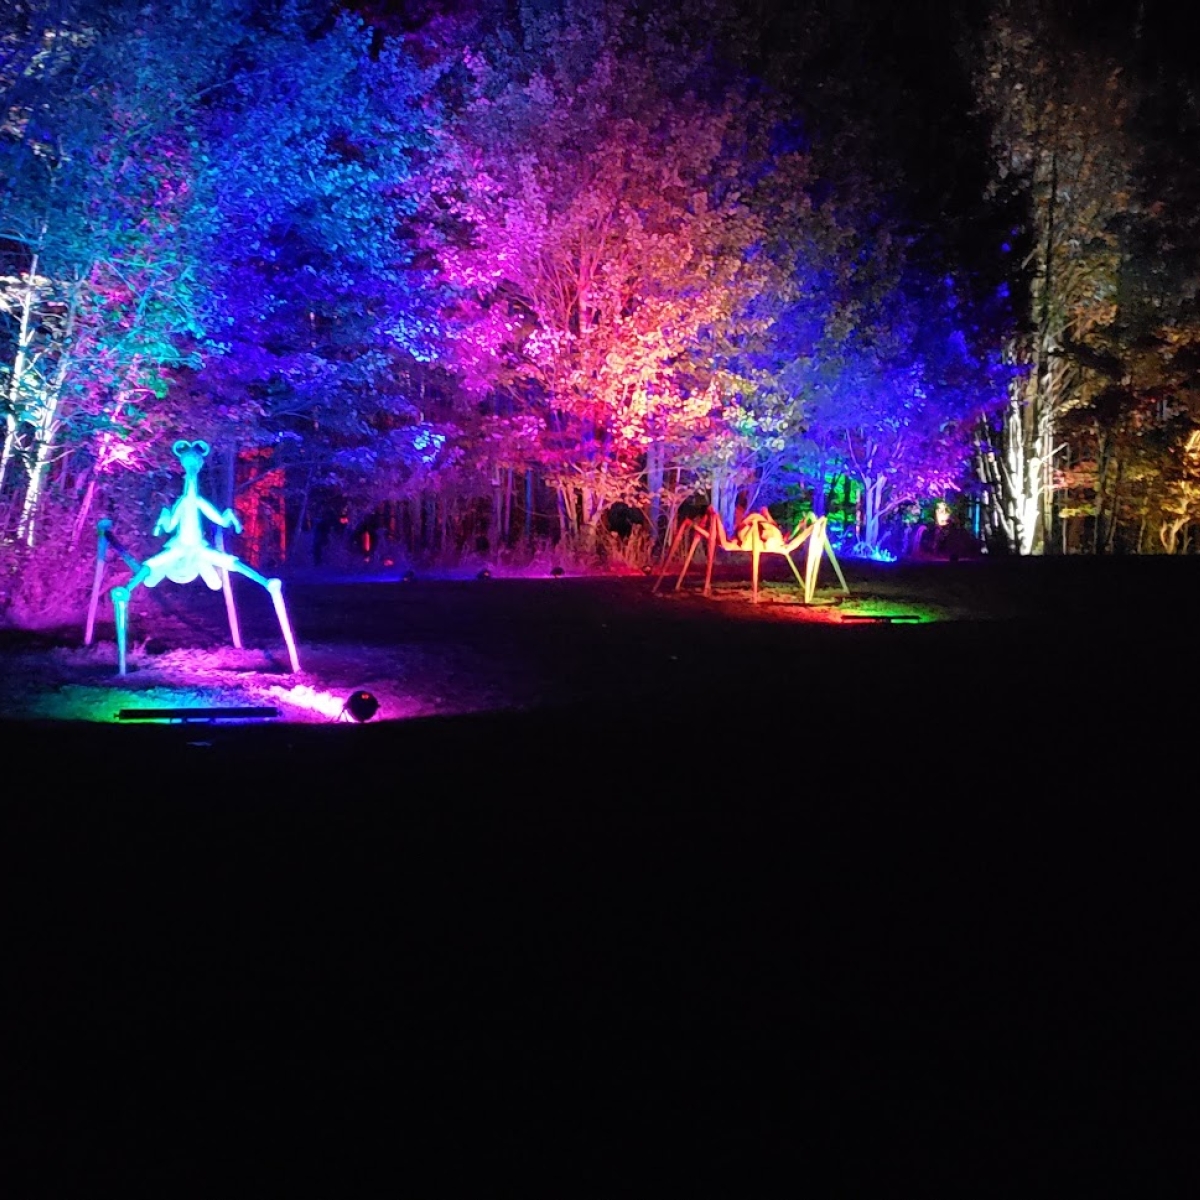 Night Lights at Griffis Sculpture Park